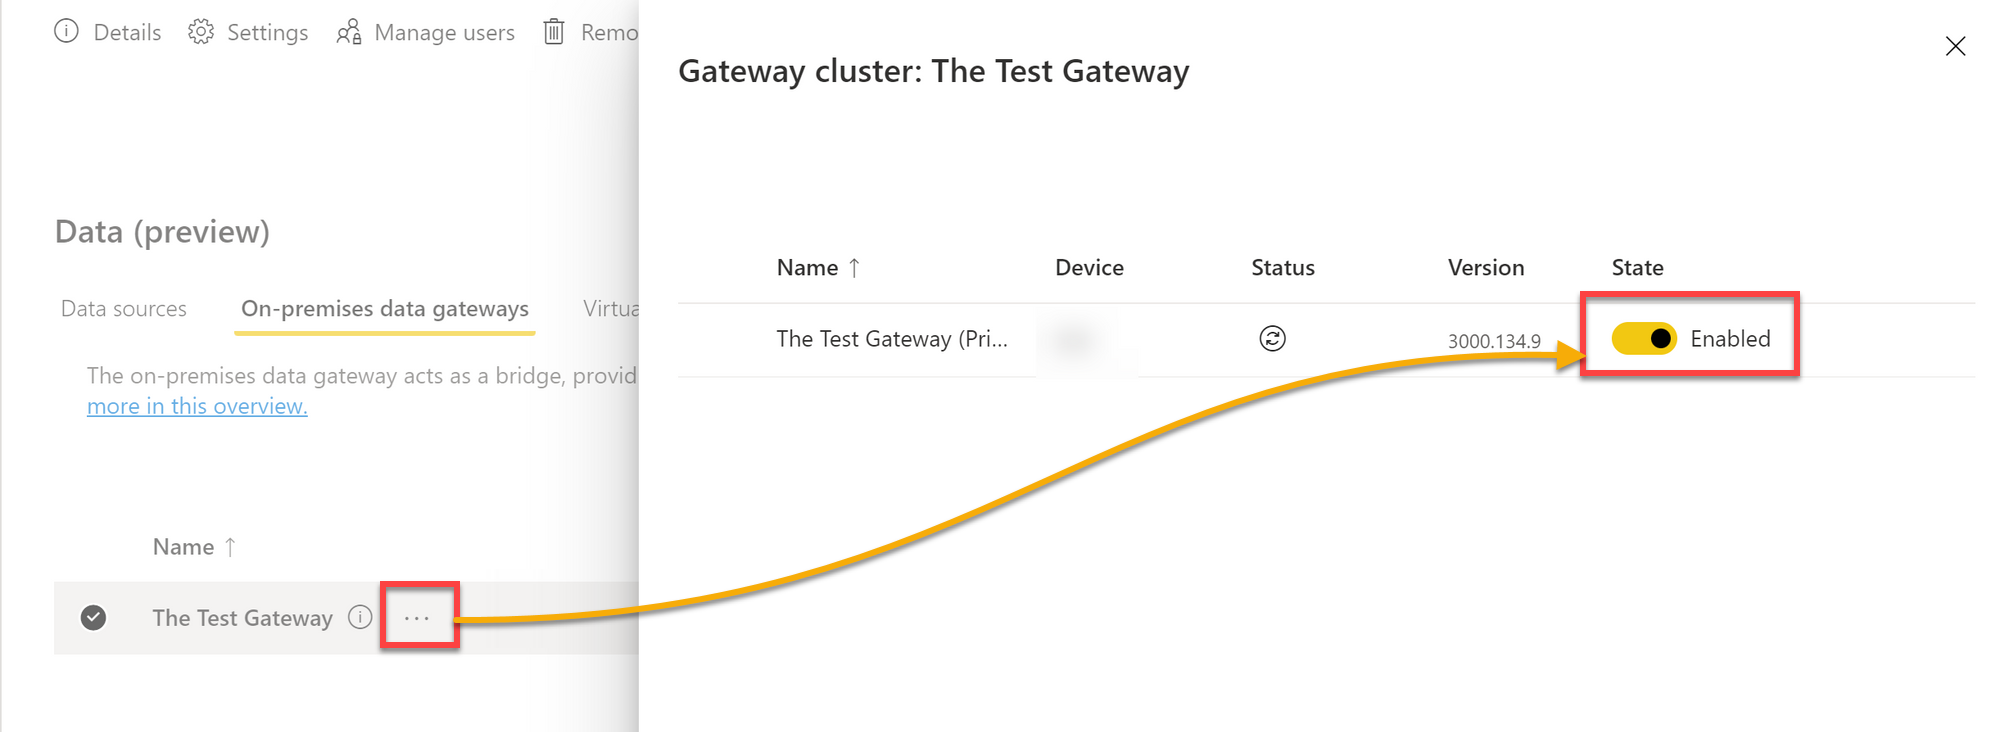 Verifying successful connection of on-premises gateway on Power BI